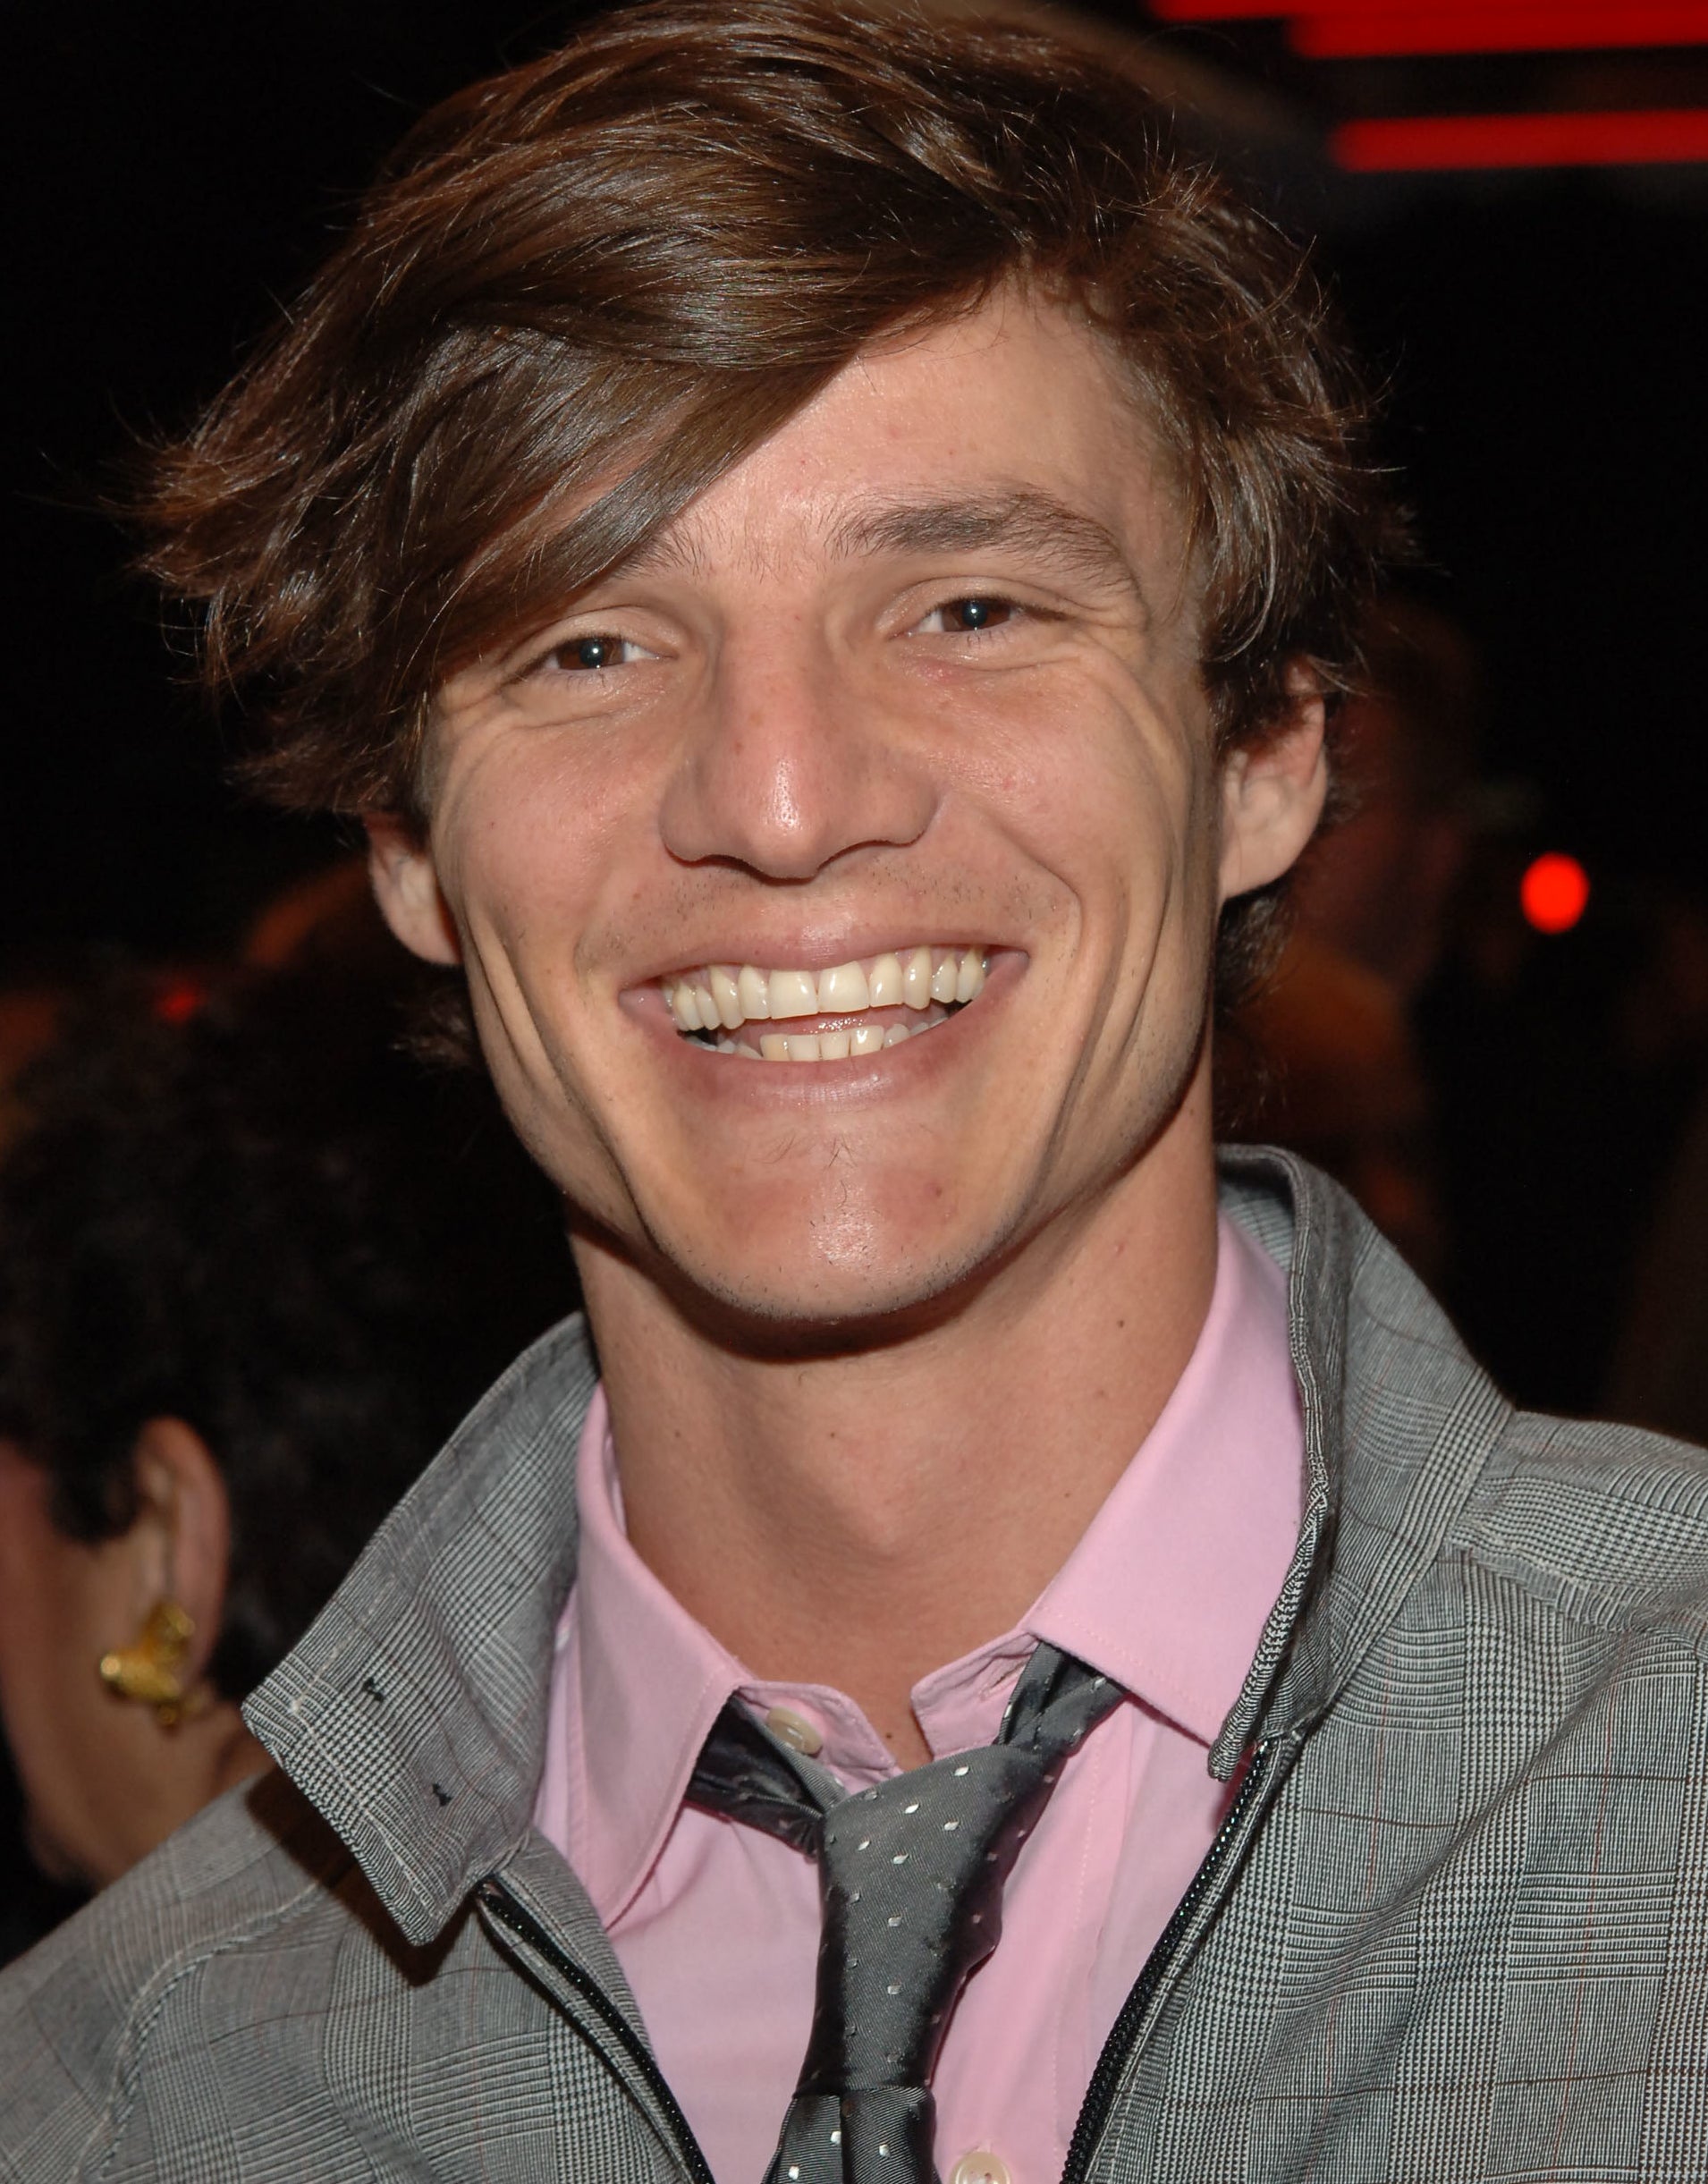 Pedro Pascal in 2005